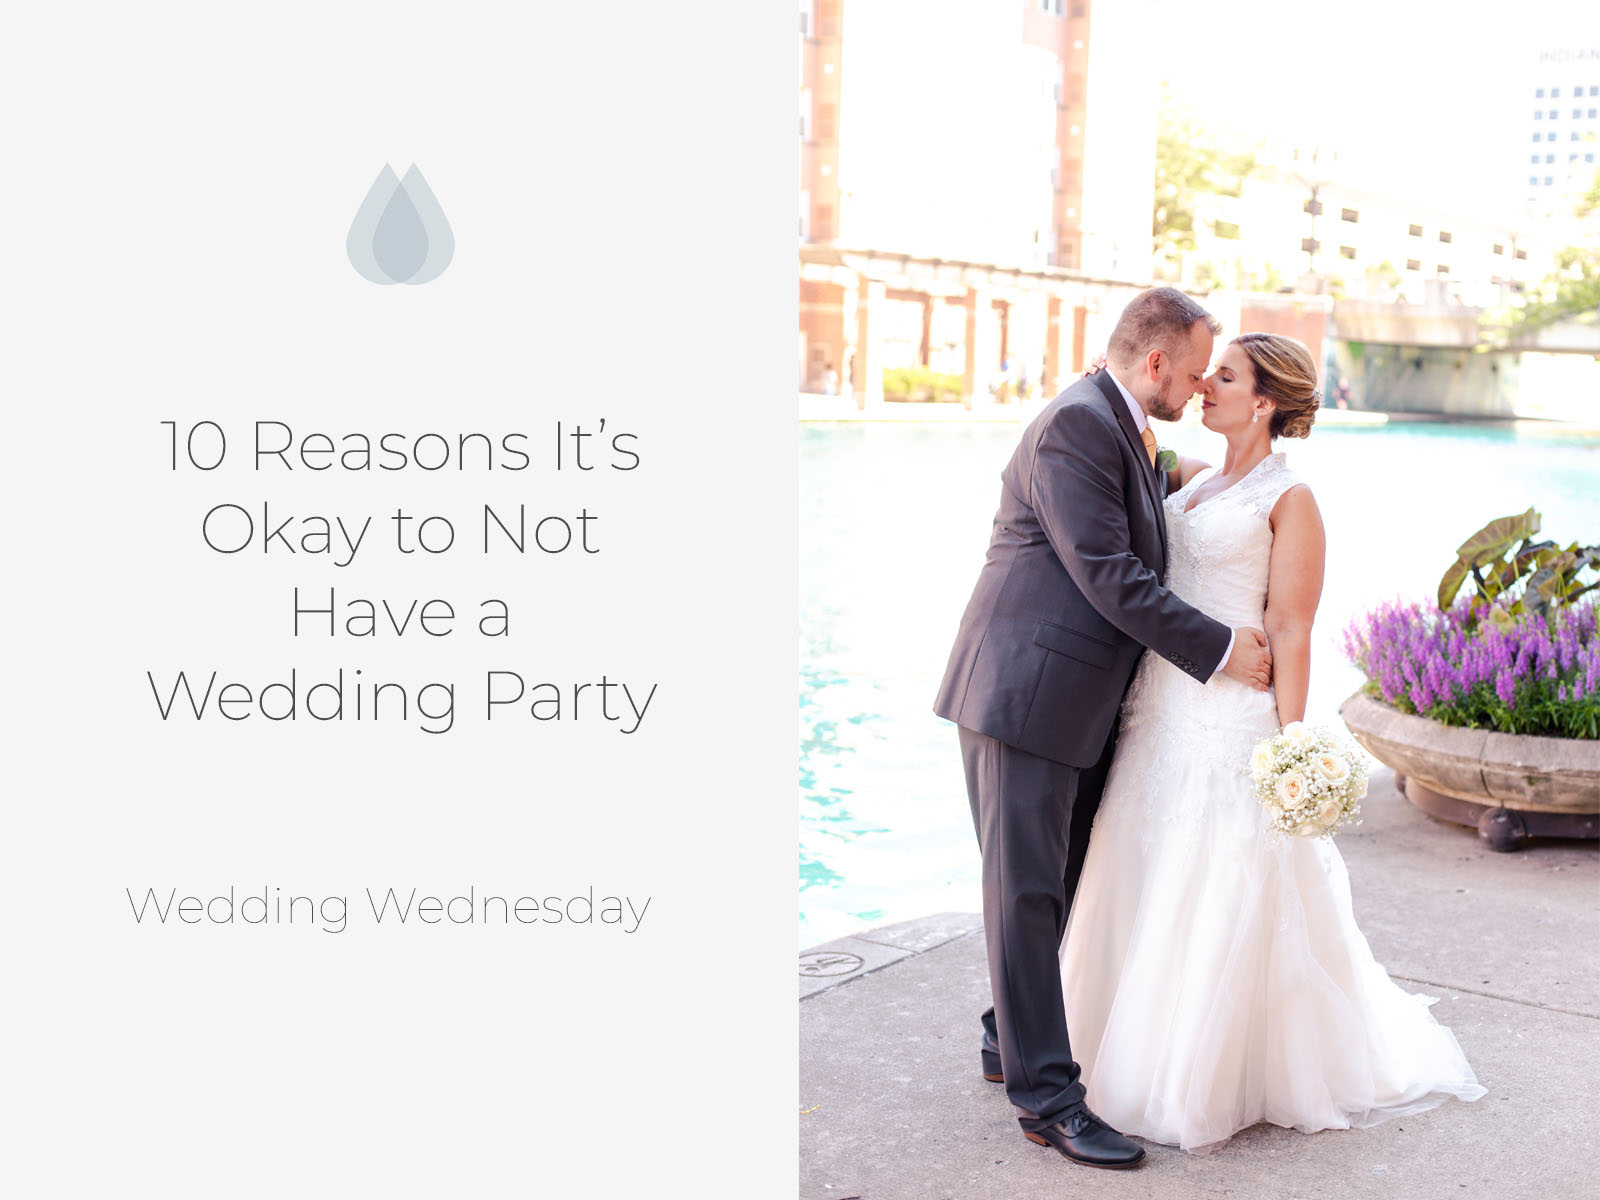 10 Reasons it's Okay to Not Have a Wedding Party